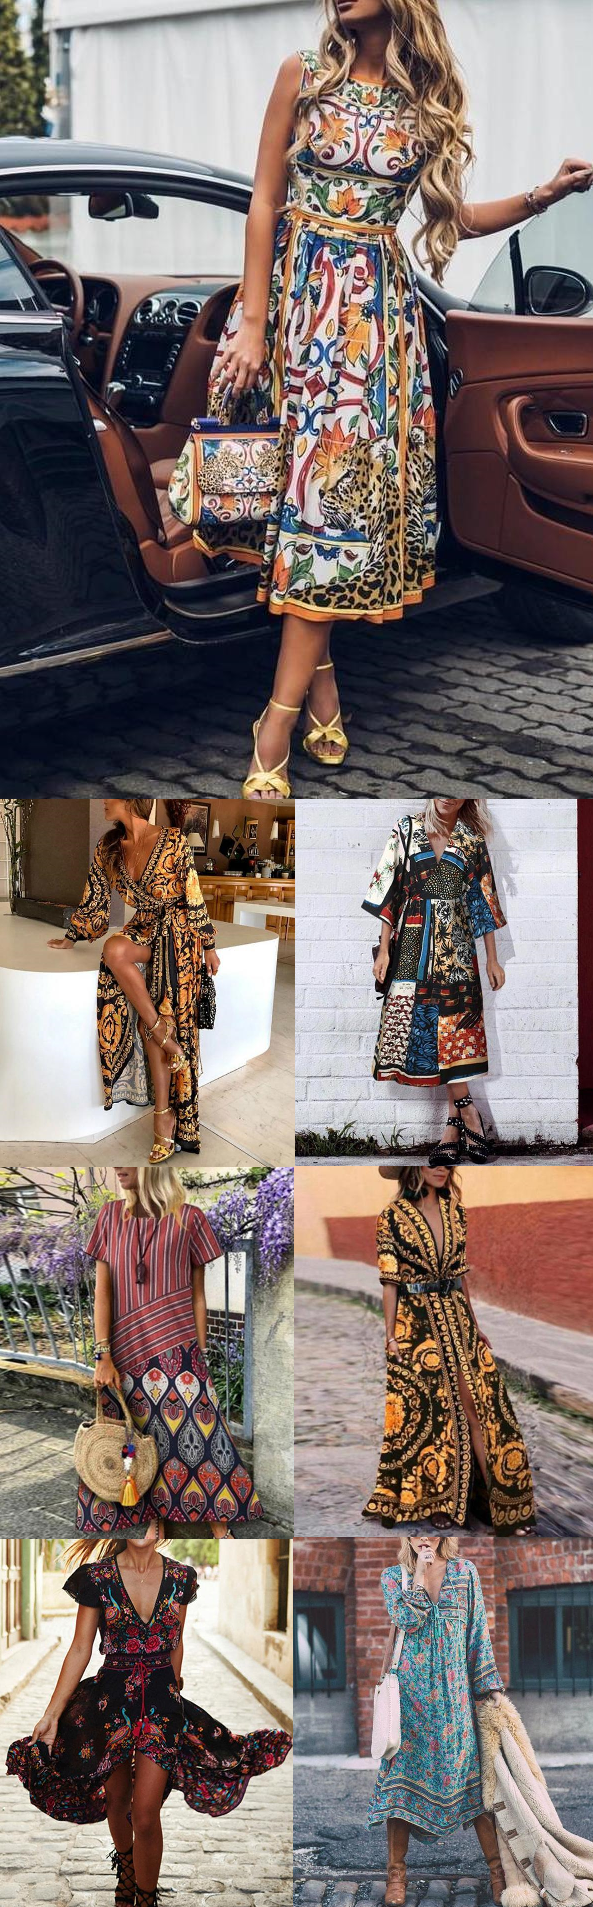 Shop Now >> 10 Must Have Bohemian Printed Dress.Ready For Your New Summer Vacation! -   22 nature crafts
 ideas